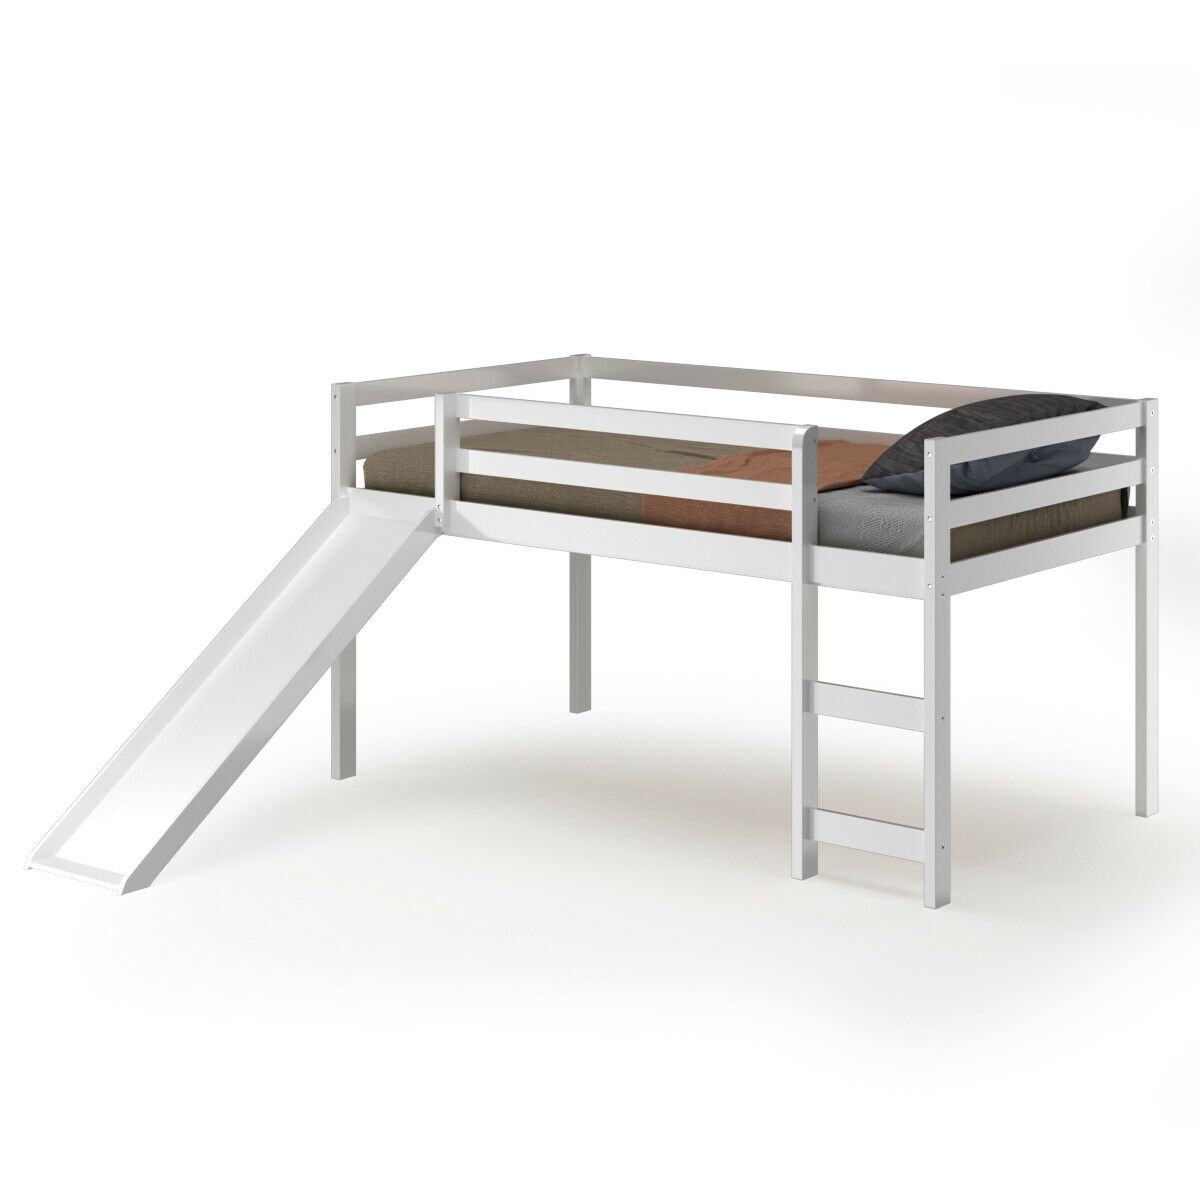 Gymax Wooden Low Loft Bed Frame w/ Slide (Twin, White) $166 + Free Shipping